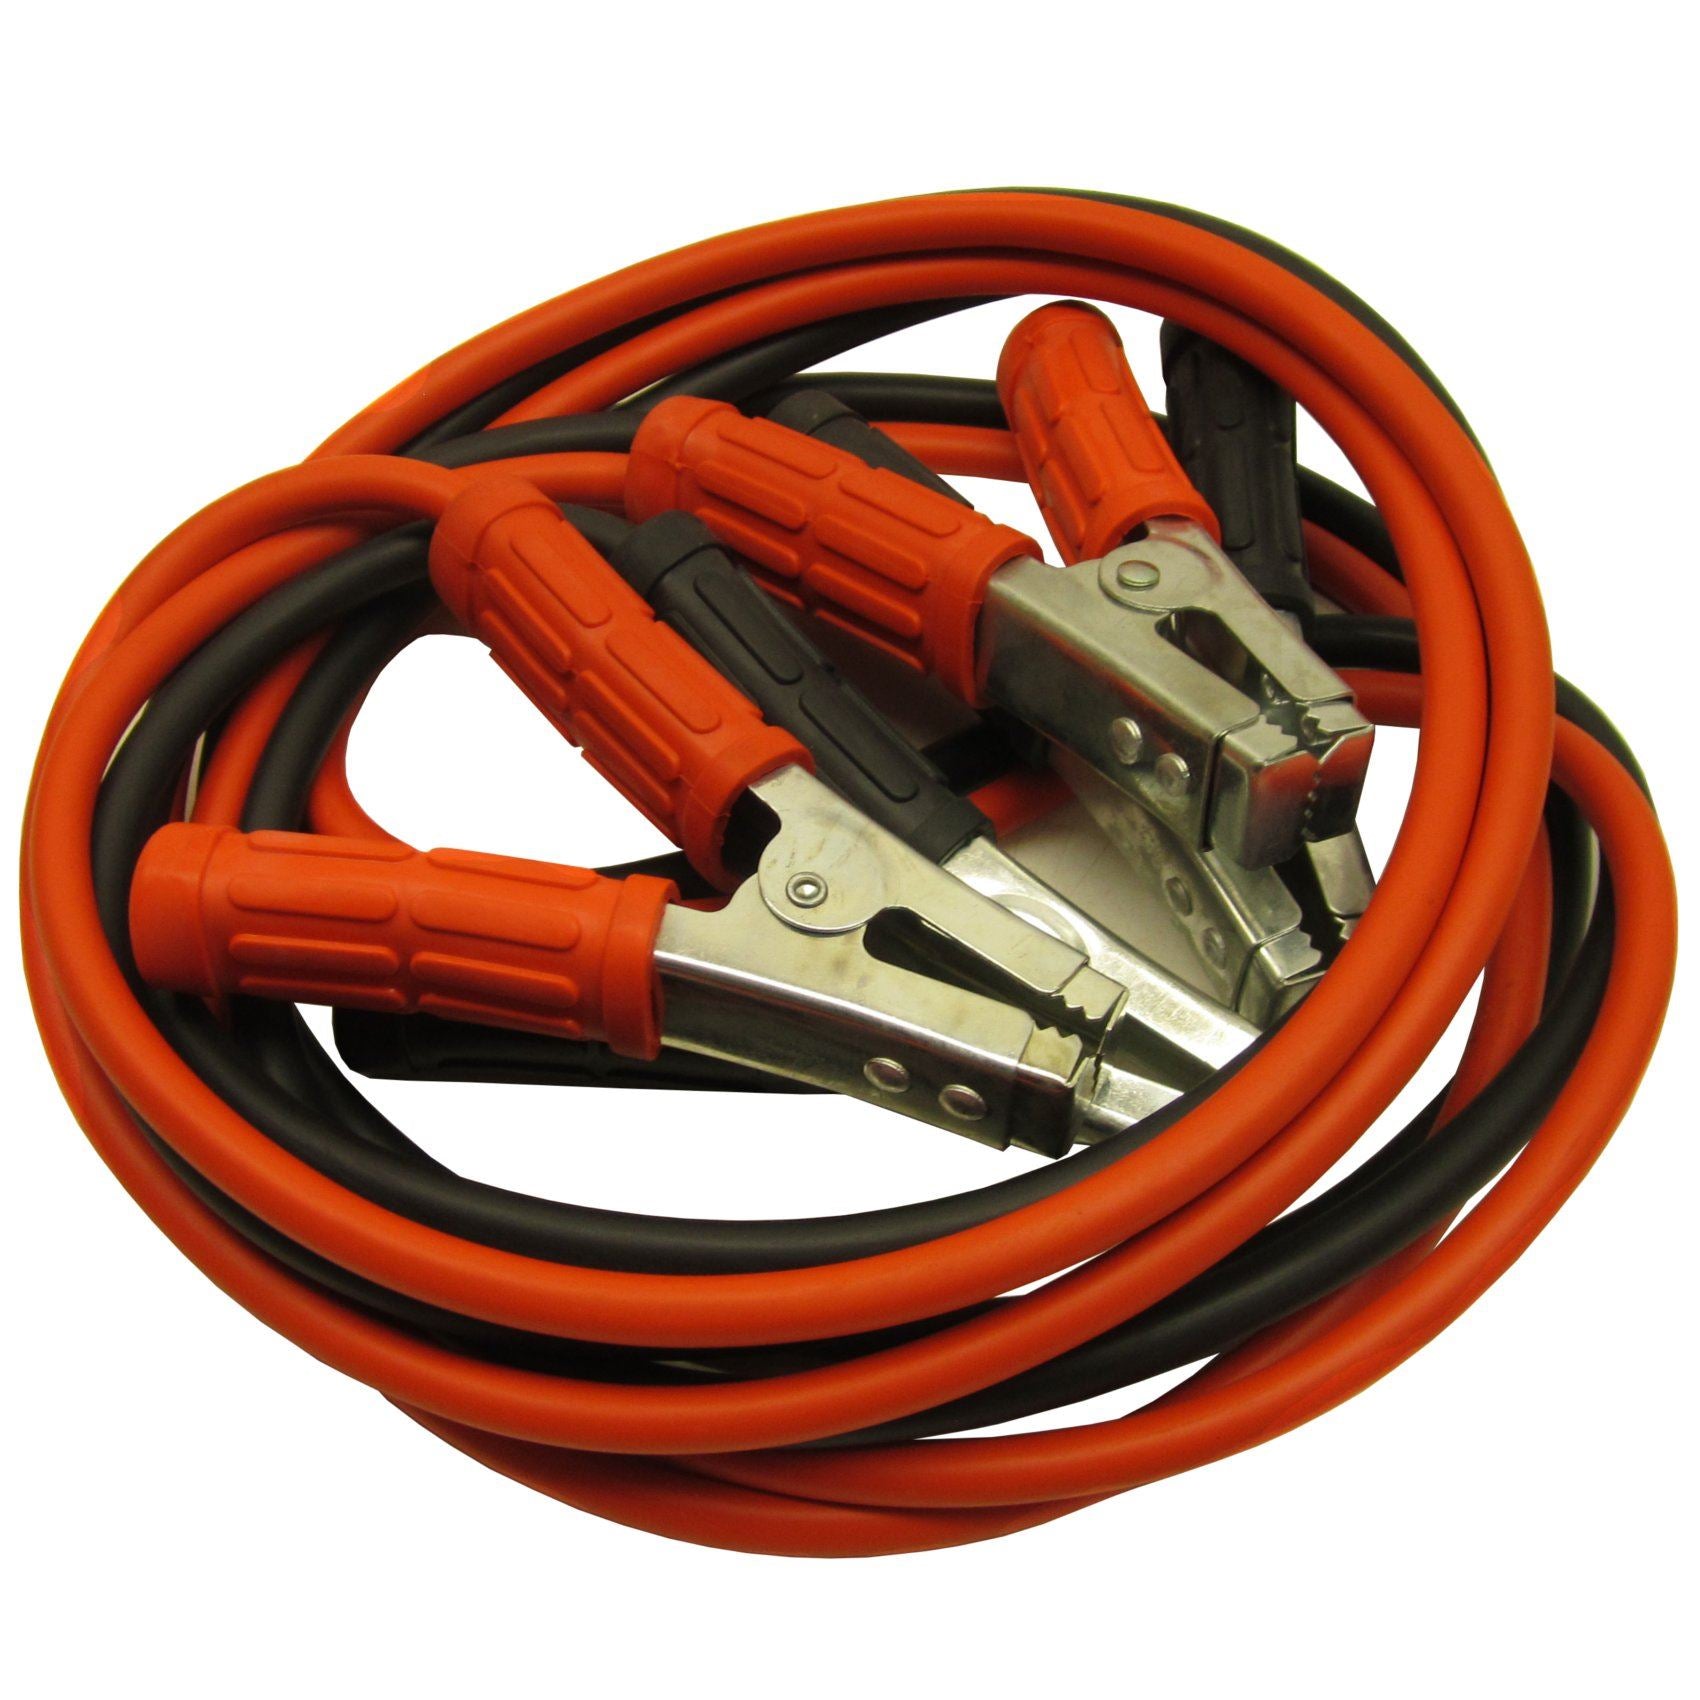 Car Jump Leads Booster Cable 3M Cable Heavy Duty 600amp TE042